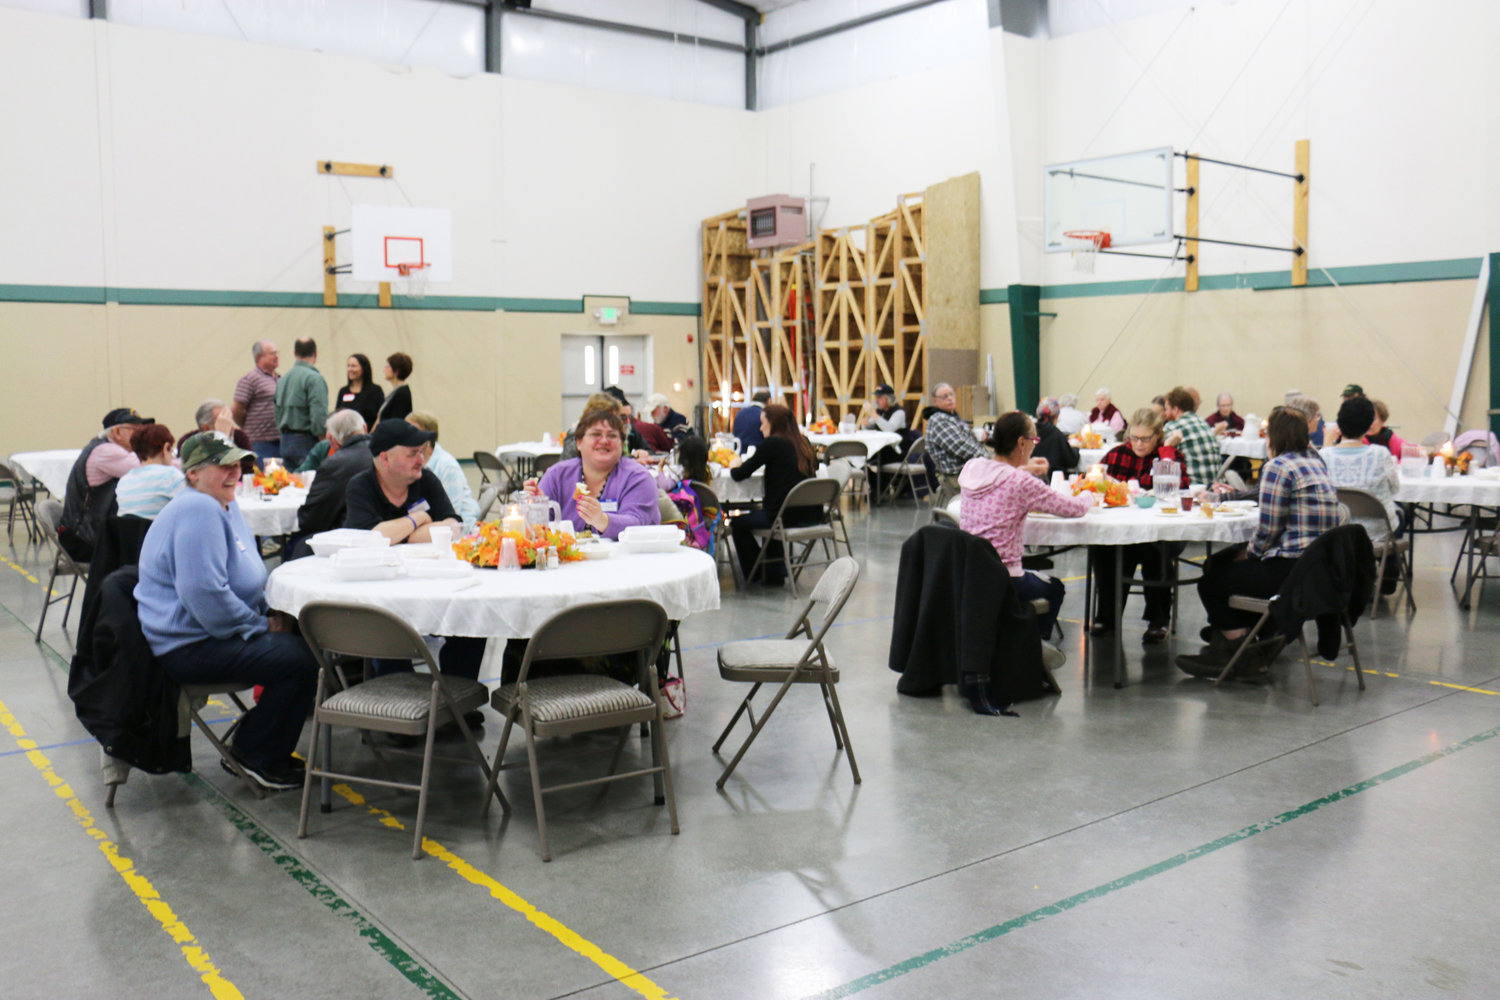 Tables are filled with people eating a free Thanksgiving meal at Immanuel Lutheran Church in this Chronicle file photo.